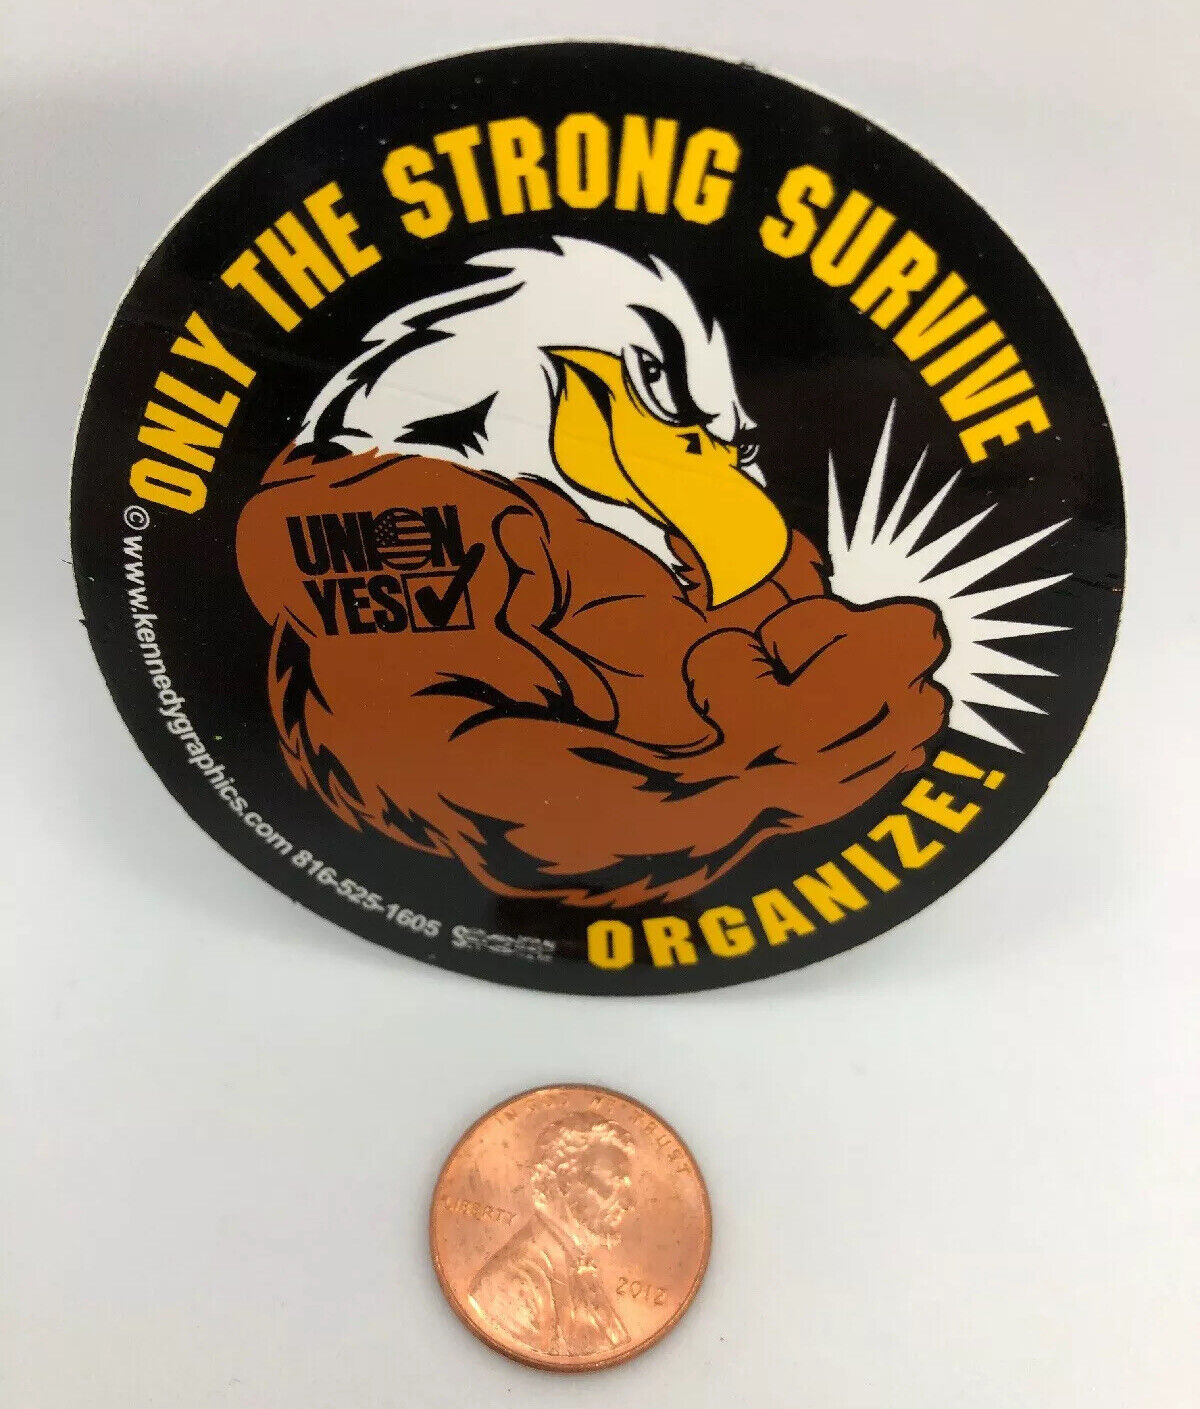 Only the Strong Survive Organize Eagle Labor Union Yes Hard Hat Sticker Decal 